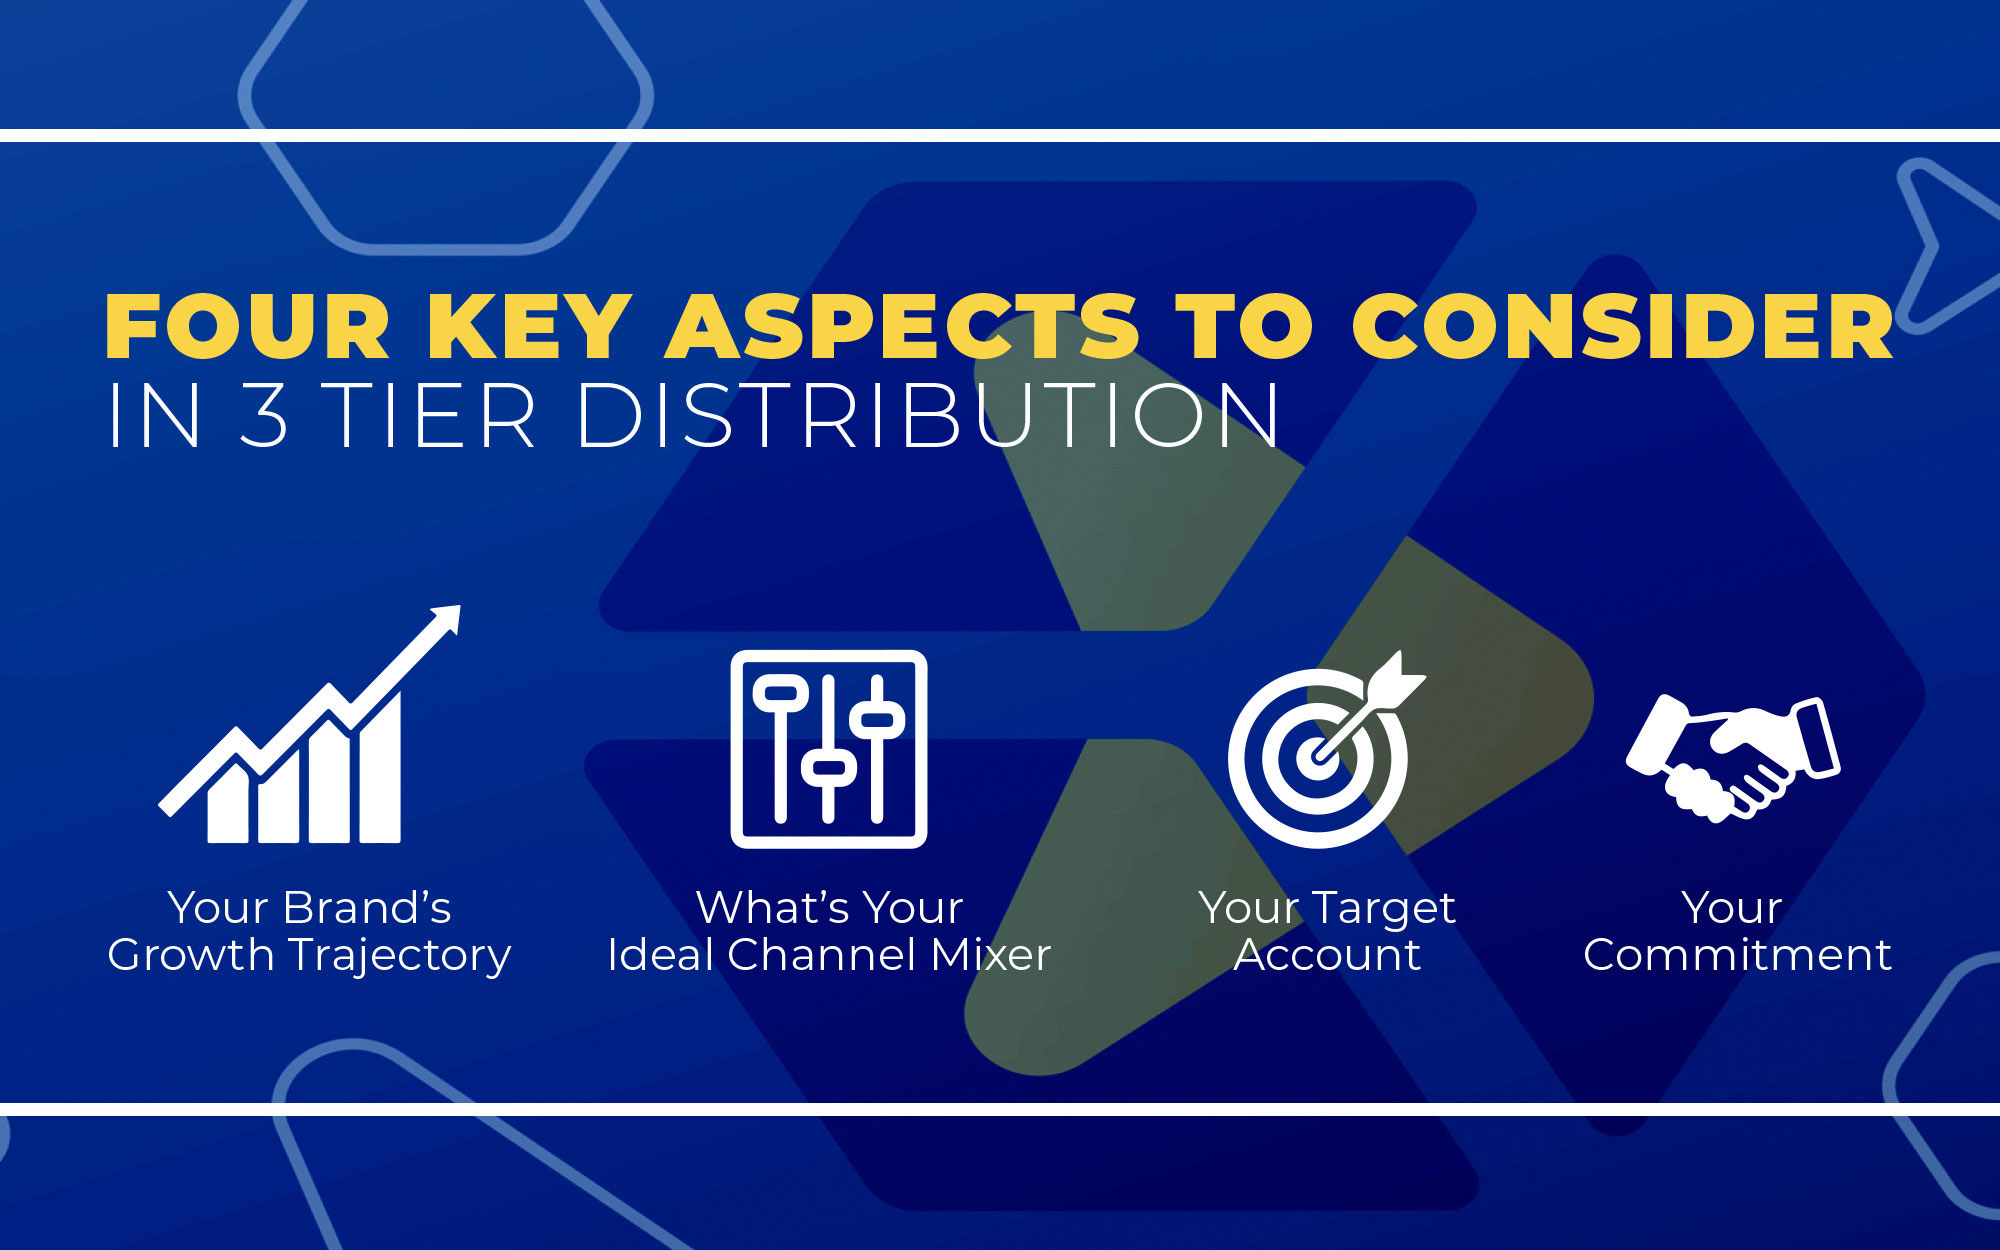 Four Key Aspects to Consider in 3 Tier Distribution